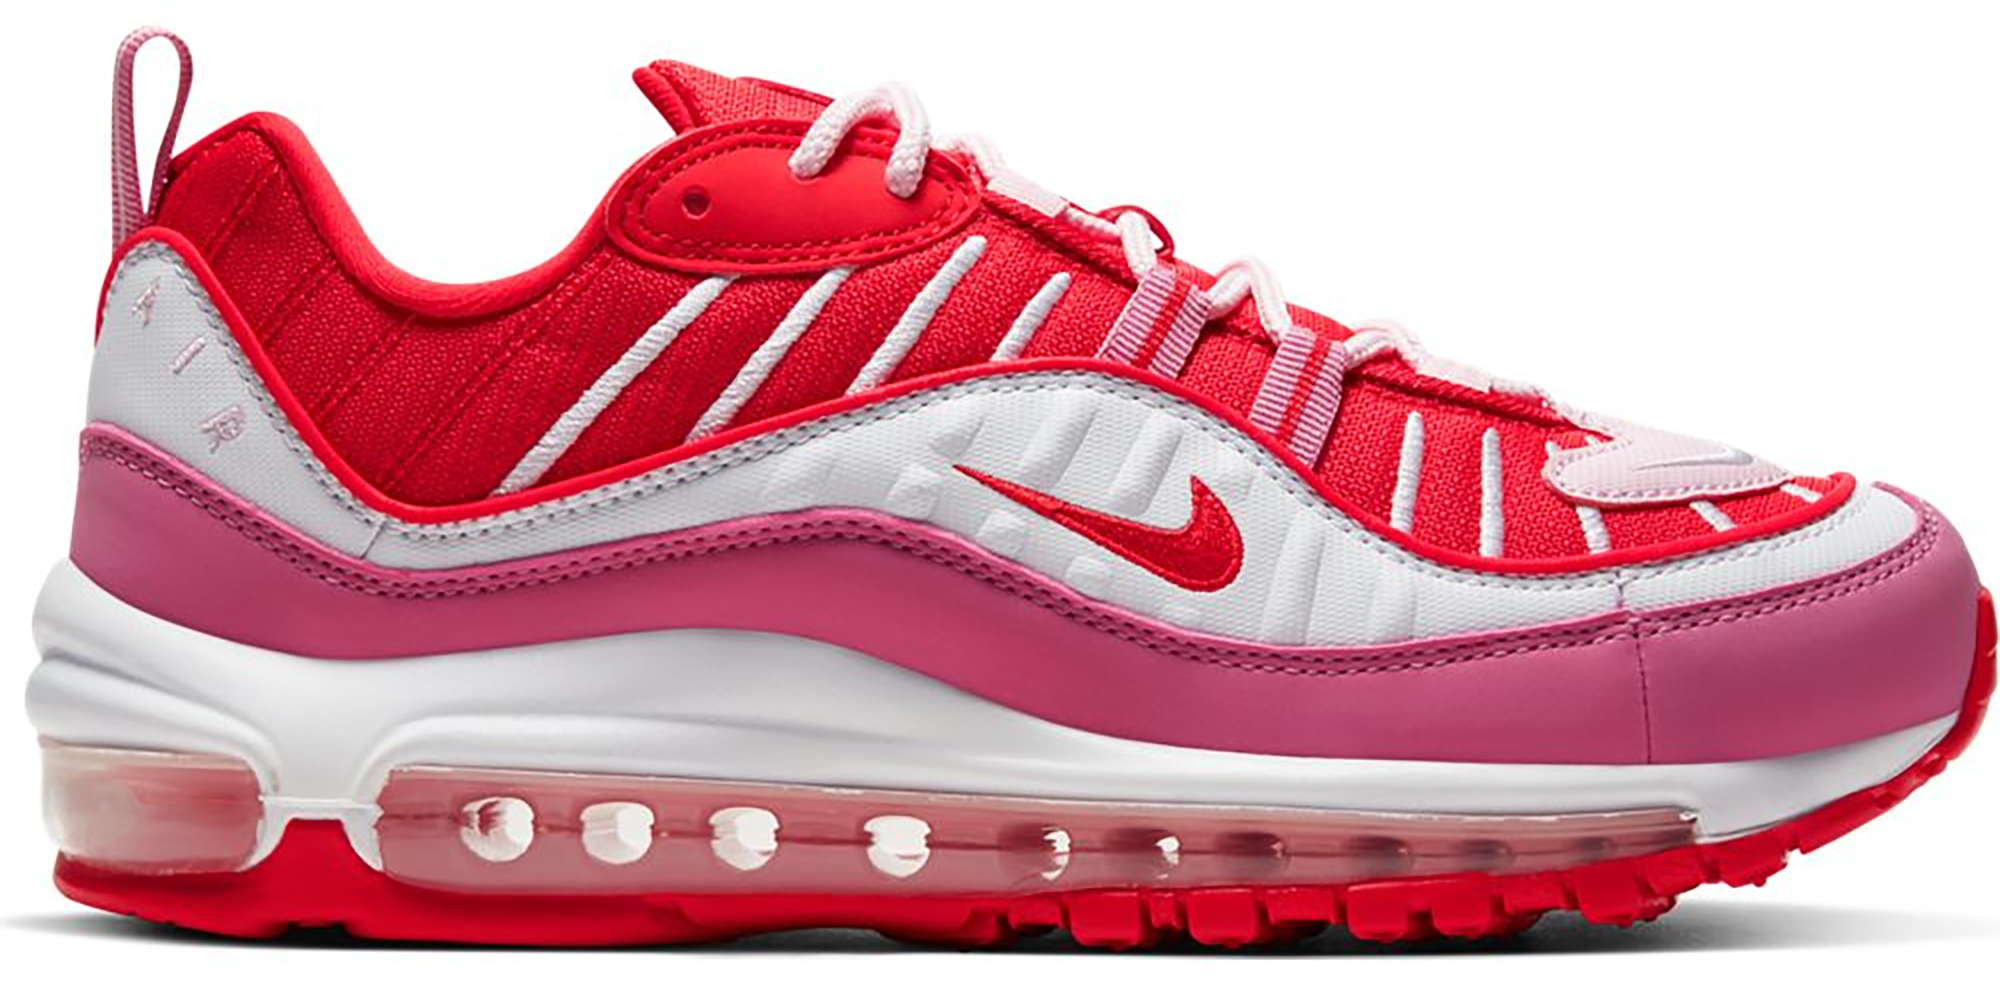 air max 98 red and pink